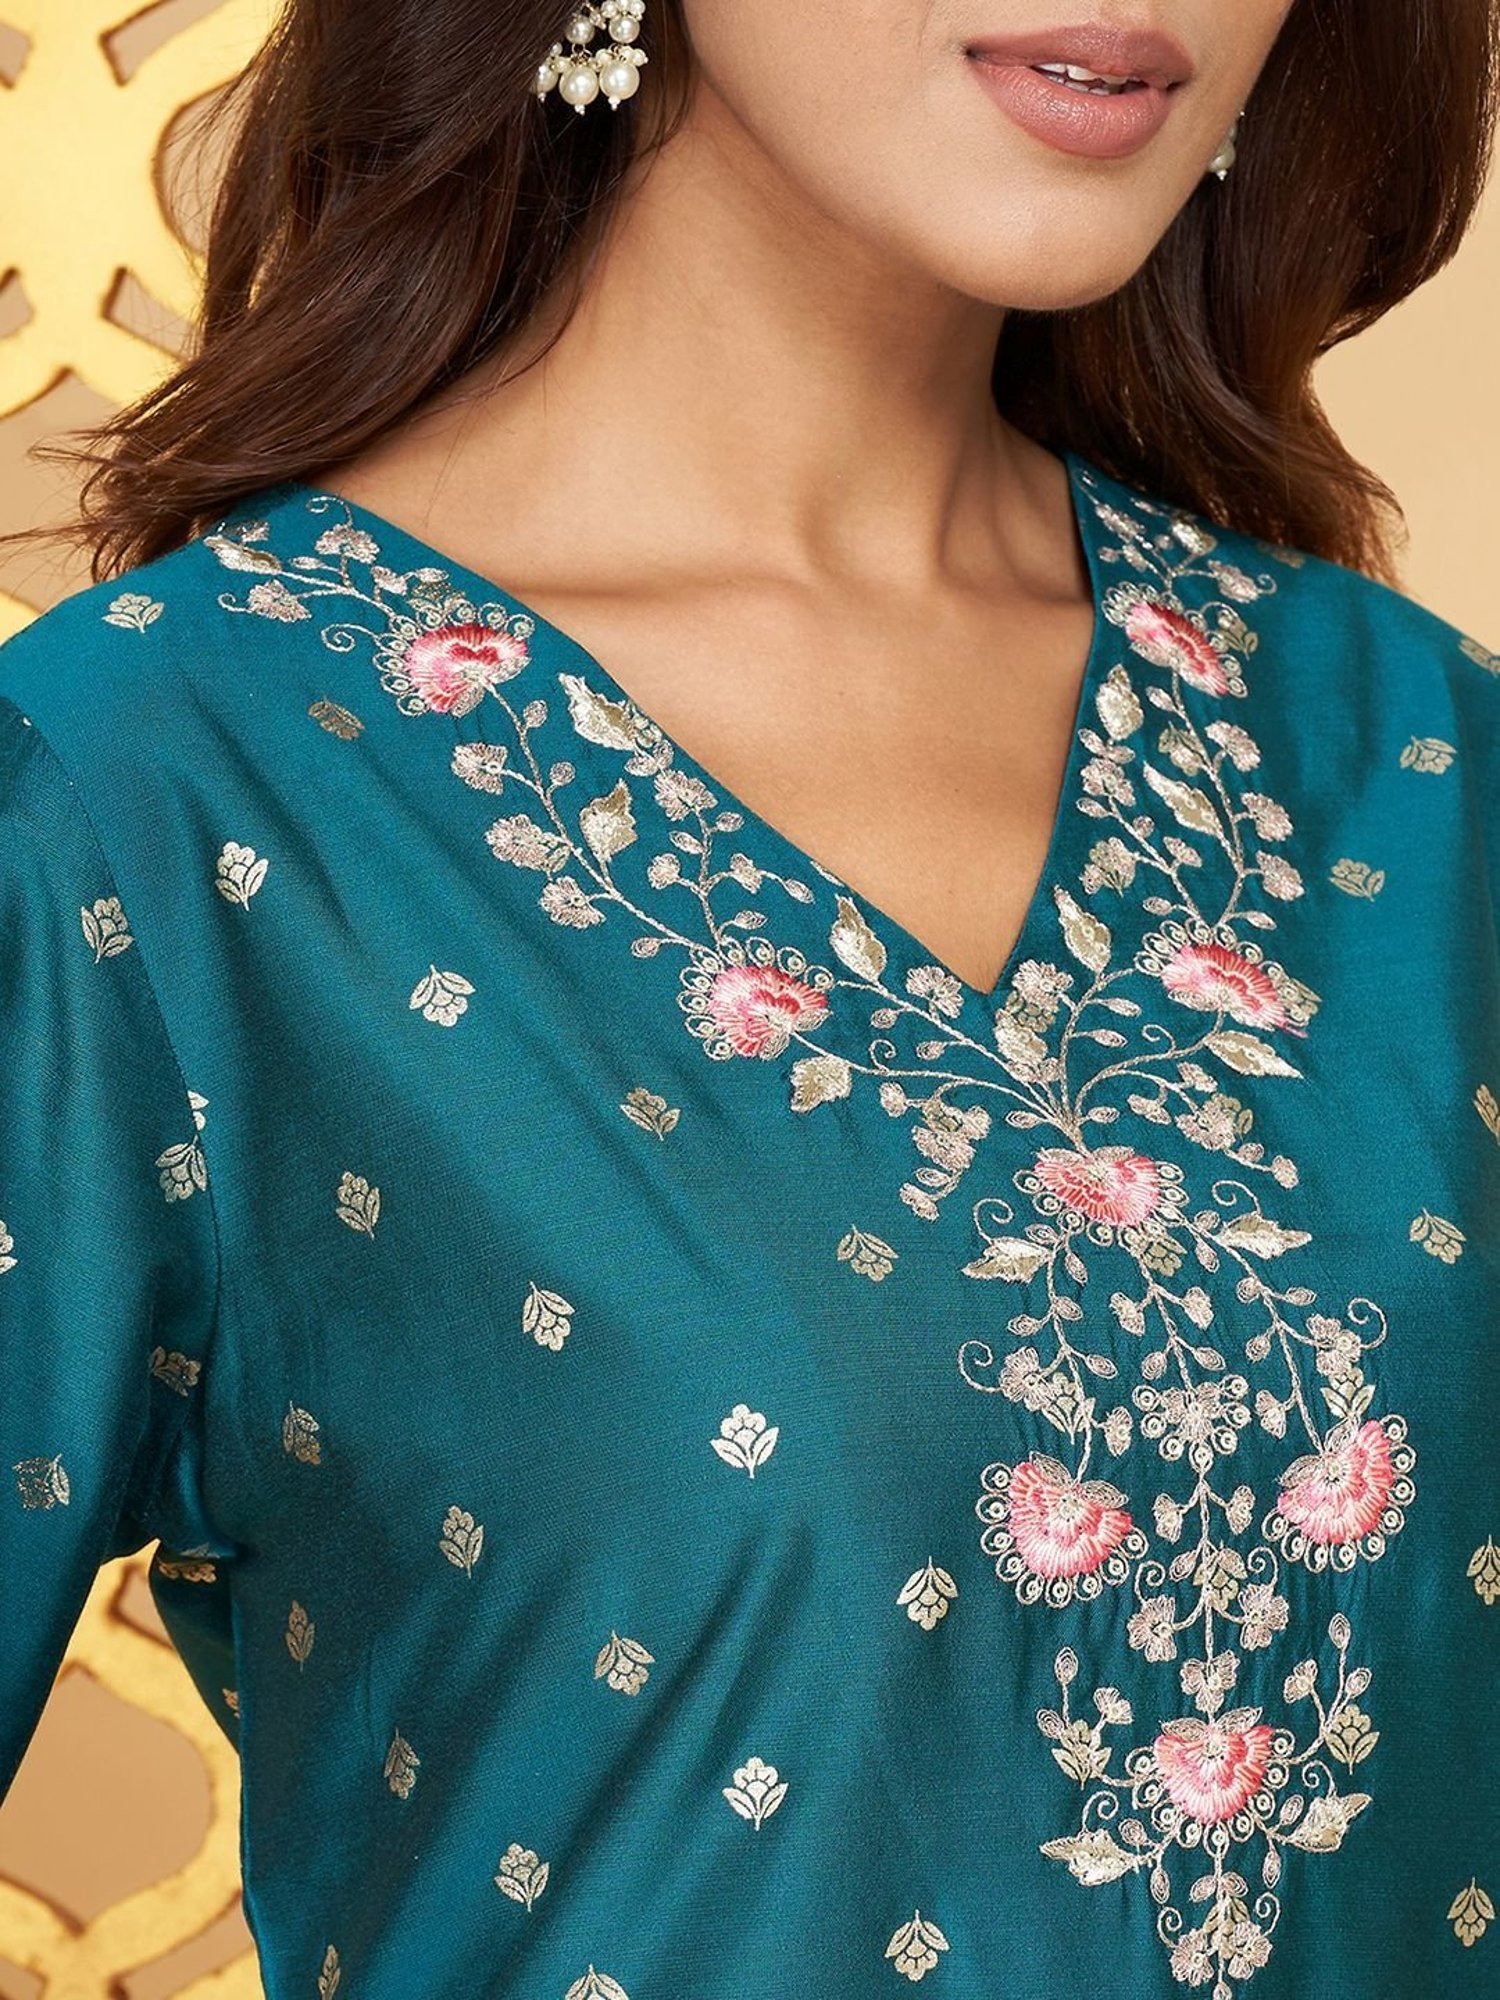 RANGMANCH BY PANTALOONS Teal Blue Embroidered Ethnic Midi Dress -  Absolutely Desi